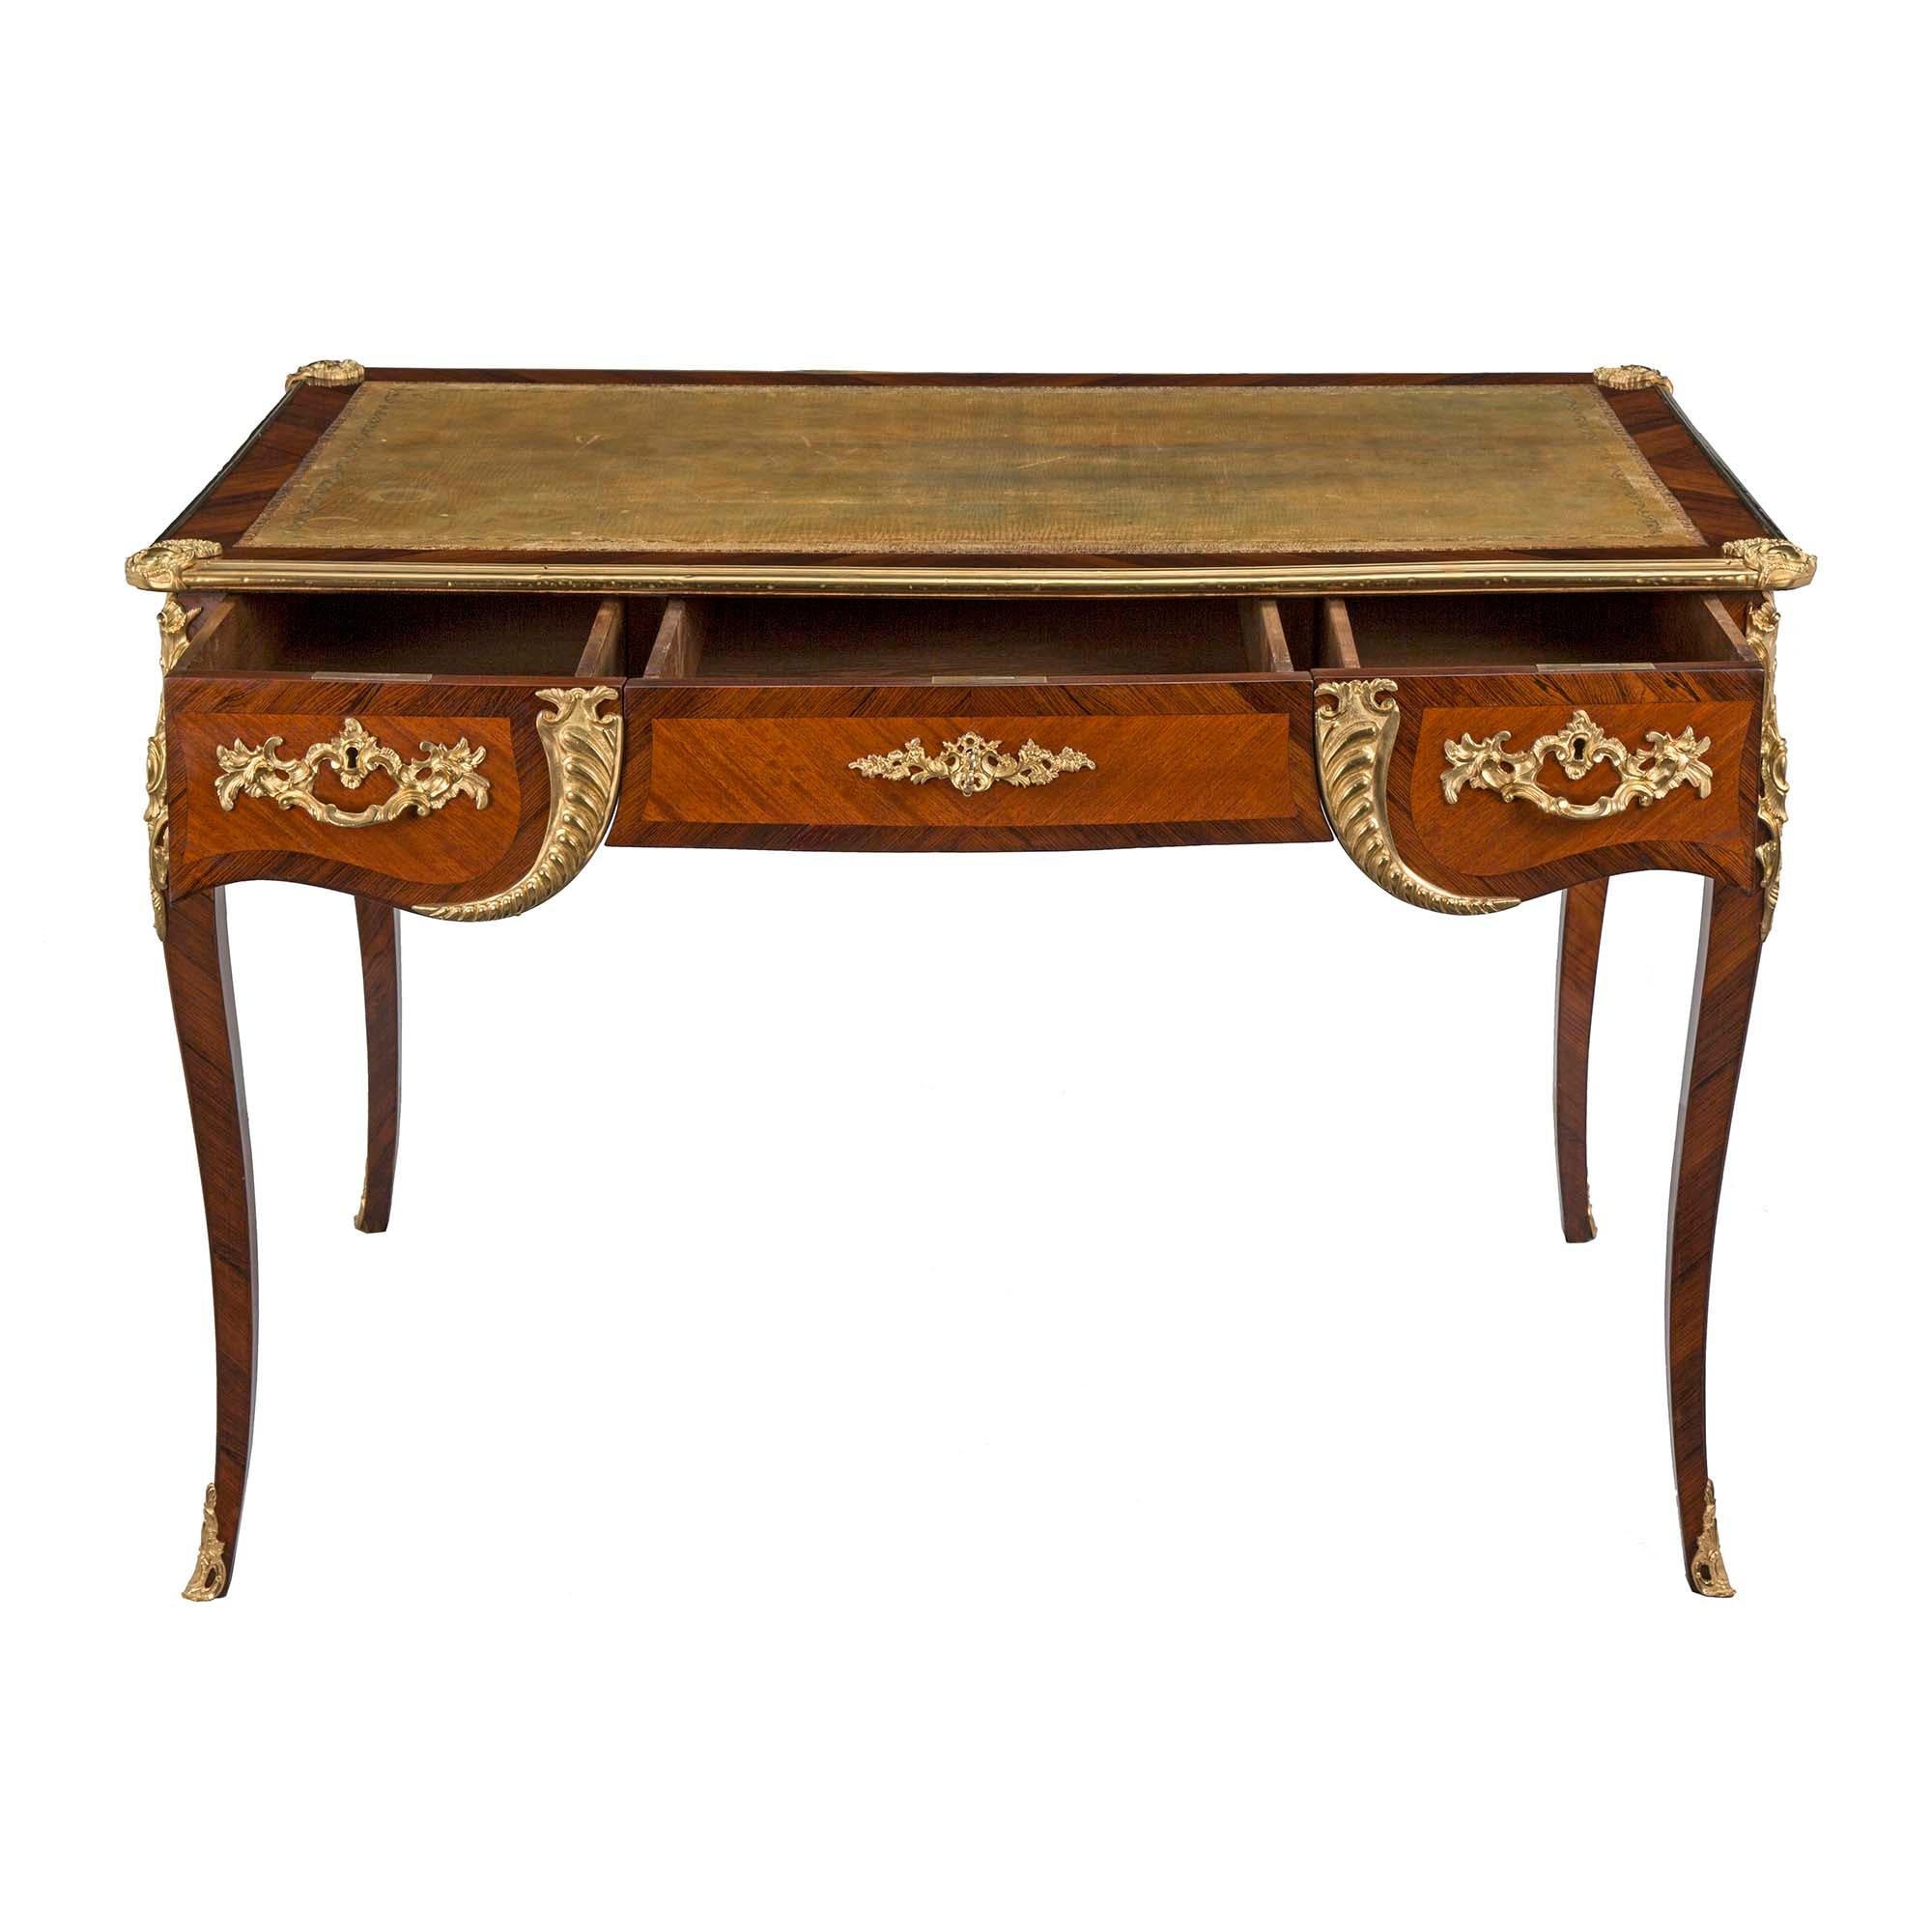 French Mid-19th Century Louis XV Style Tulipwood and Kingwood Bureau Plat For Sale 2